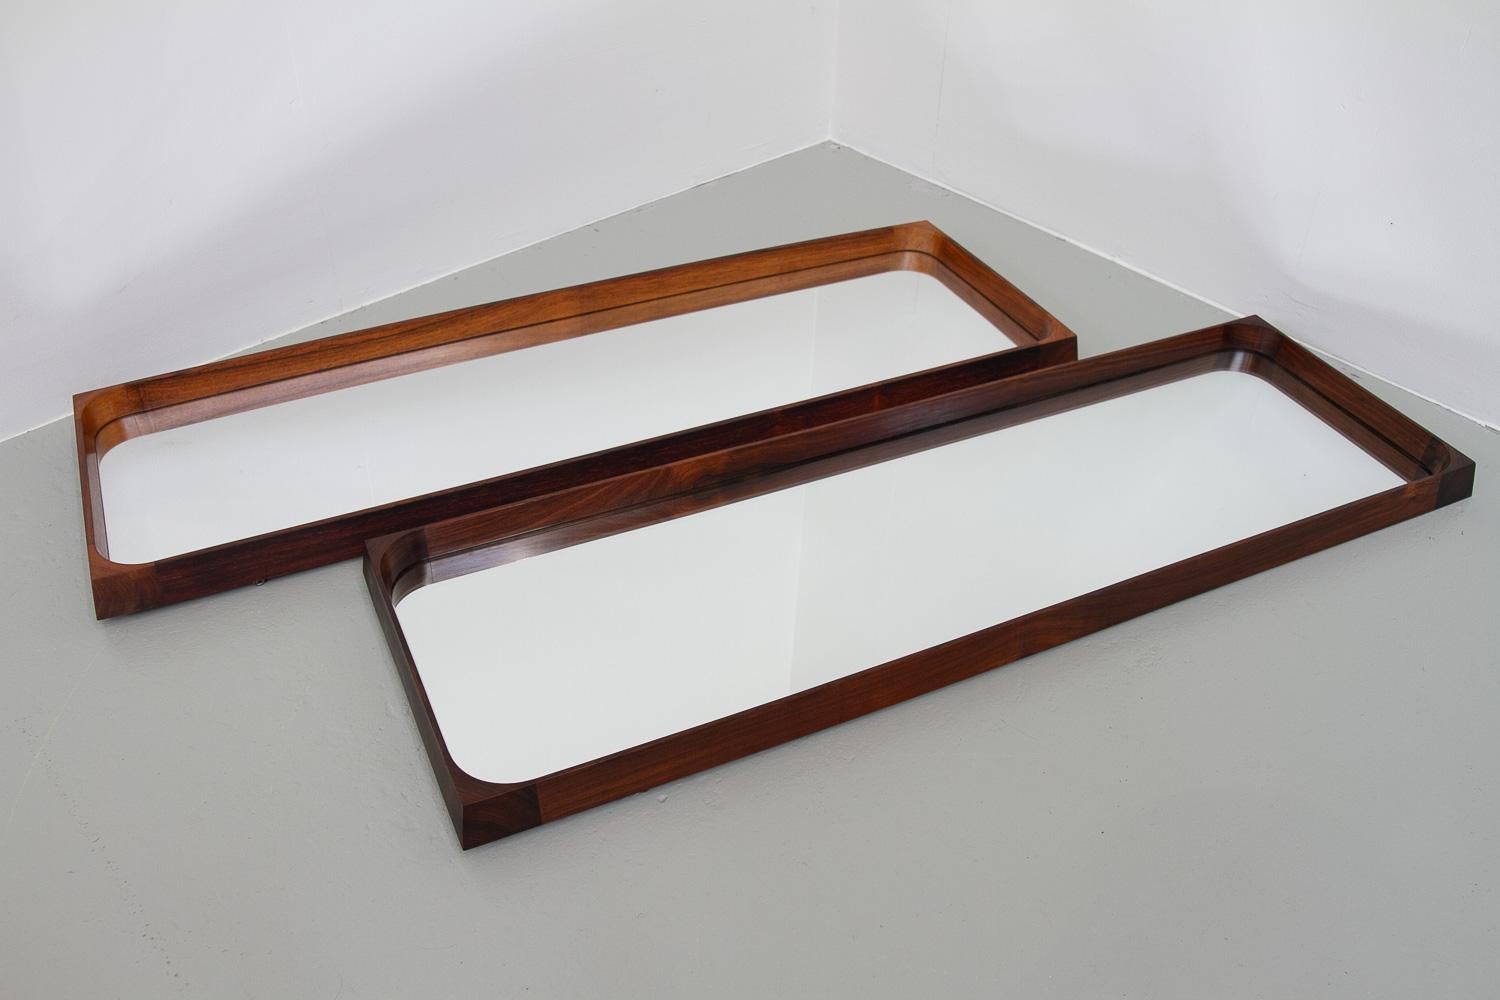 Danish Modern Rosewood Mirrors by Niels Clausen for NC Møbler, 1960s. Set of 2. For Sale 5